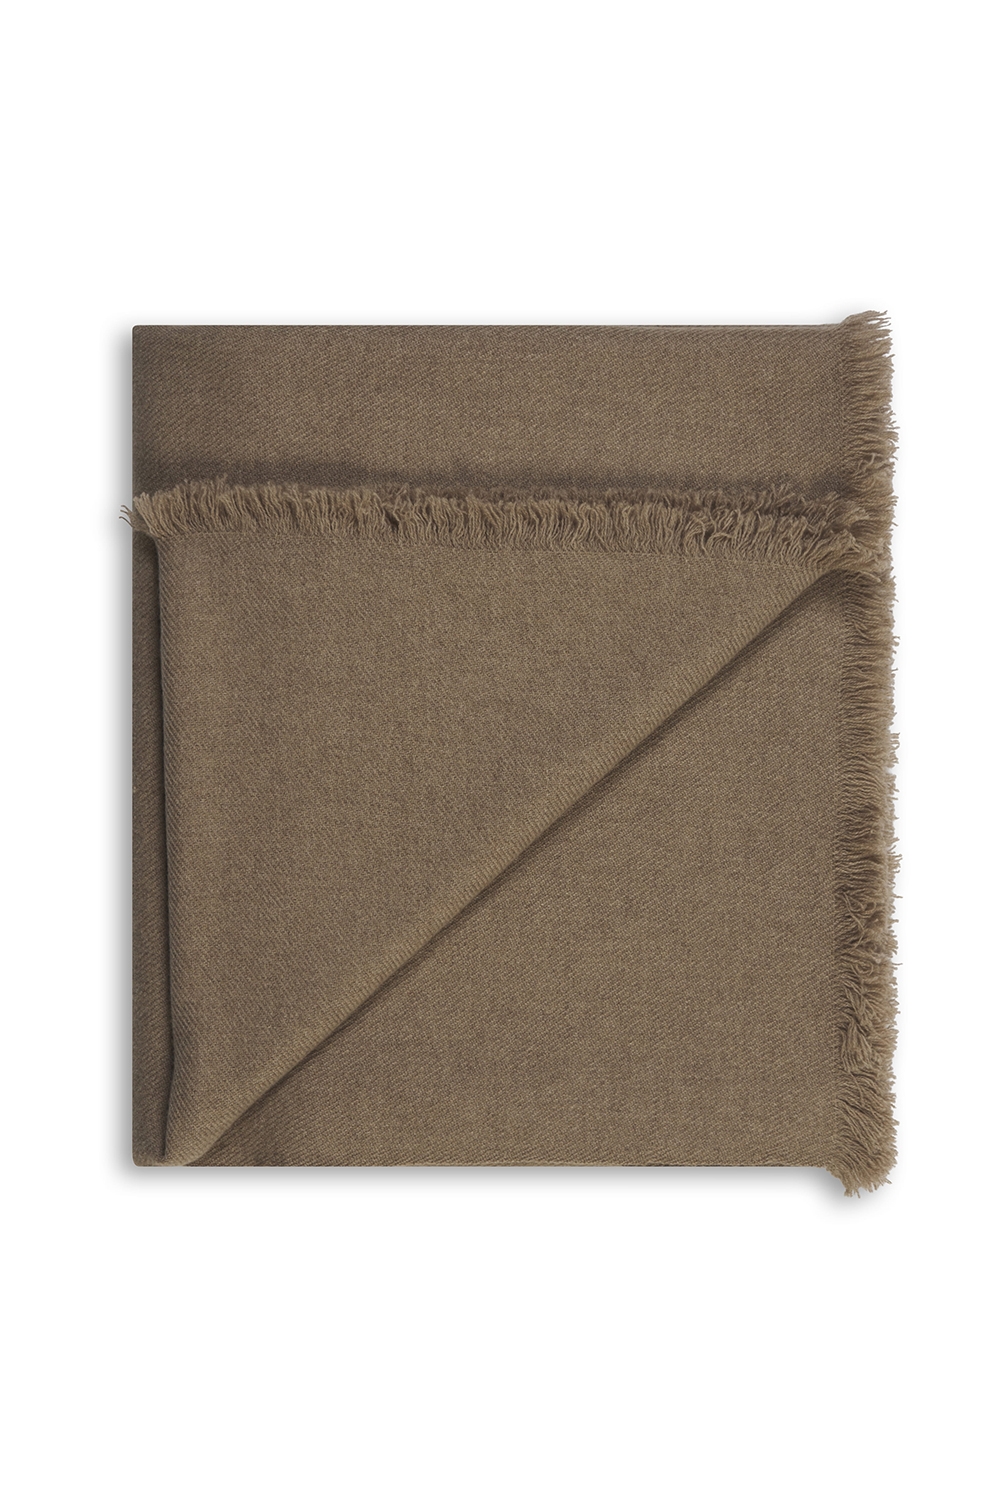 Cashmere accessories blanket ama natural 180 x 240 natural brown 180 x 240 cm